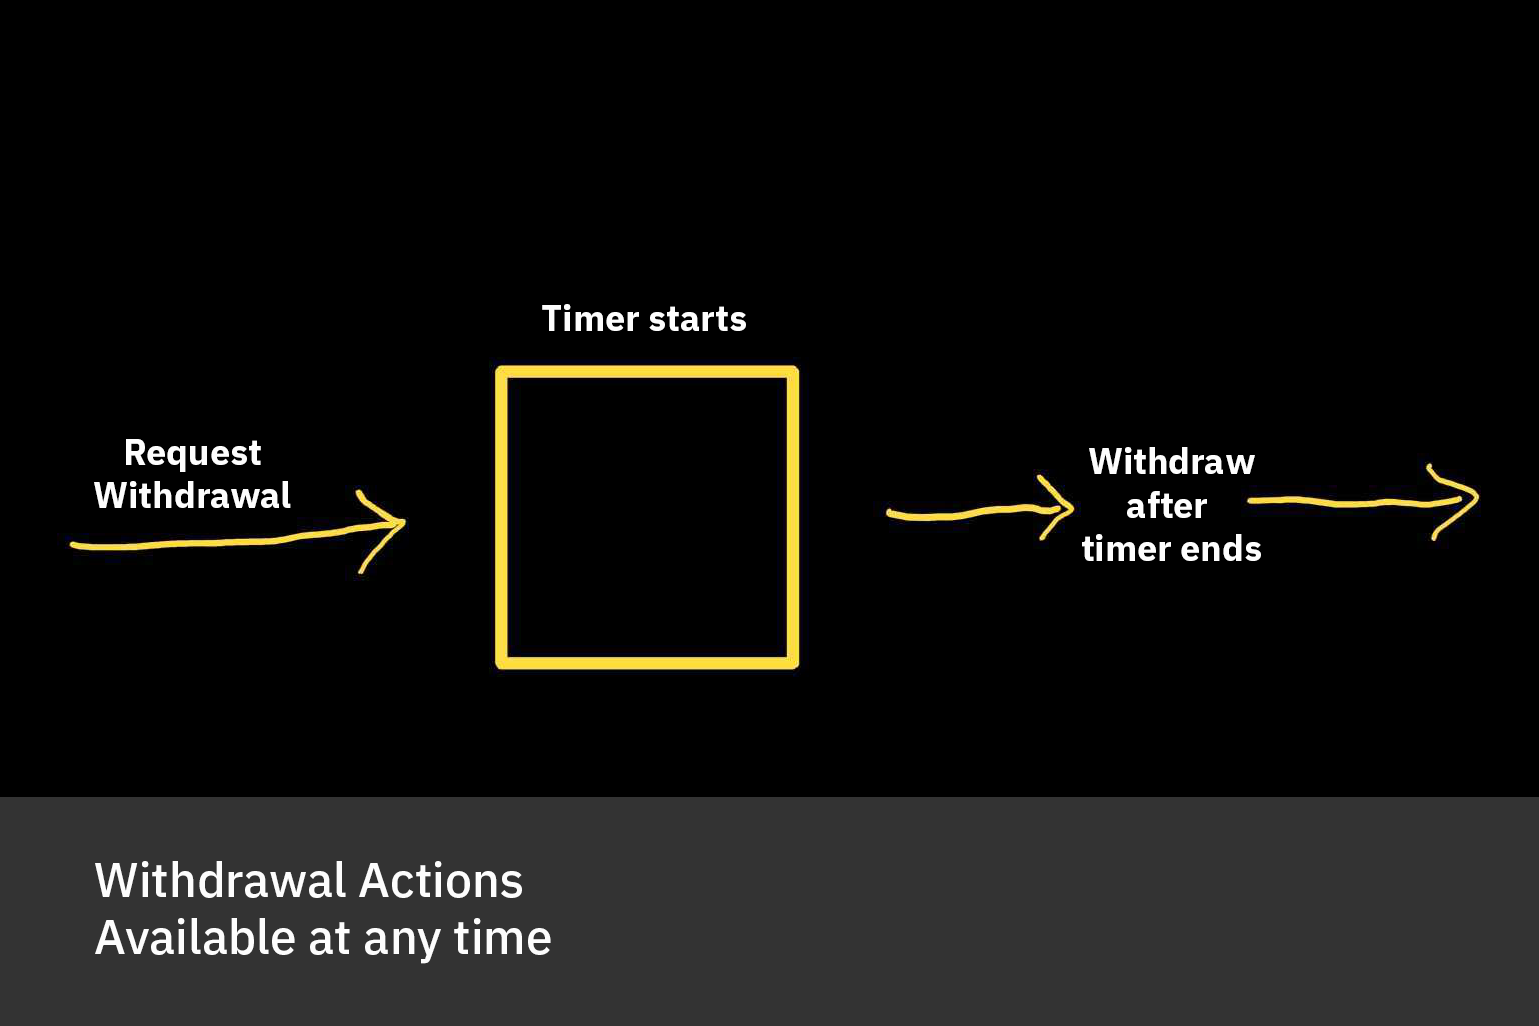 Withdrawal actions